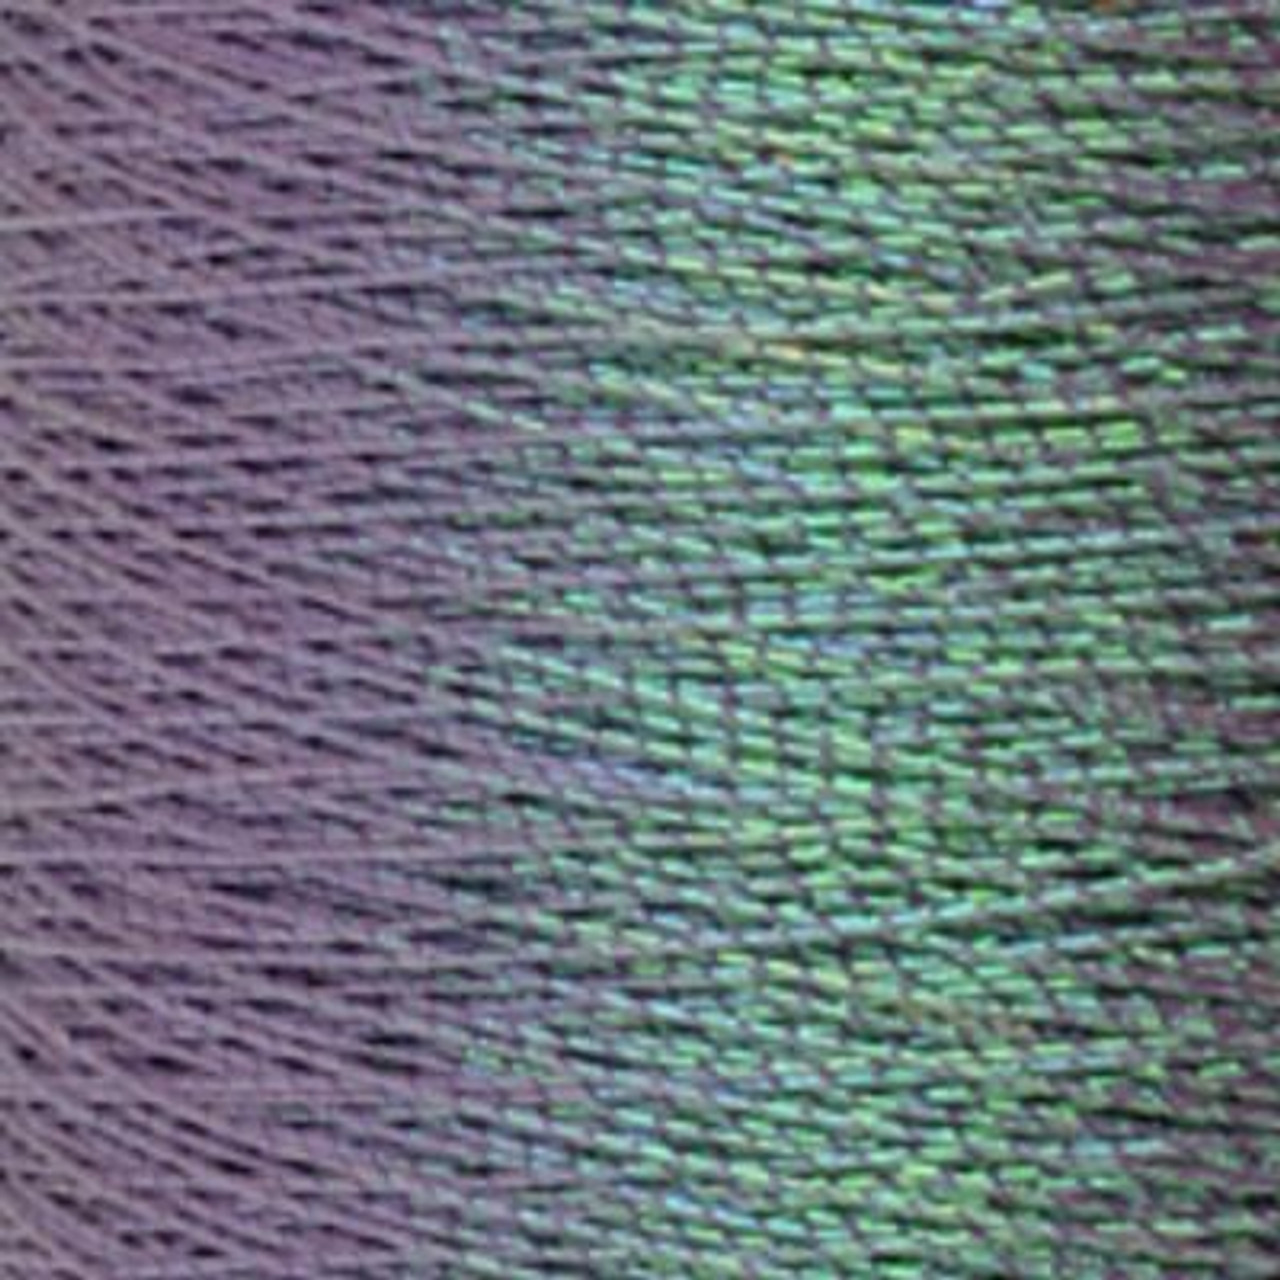 Yenmet Metallic Embroidery Thread Pearlessence and Solids 500M 